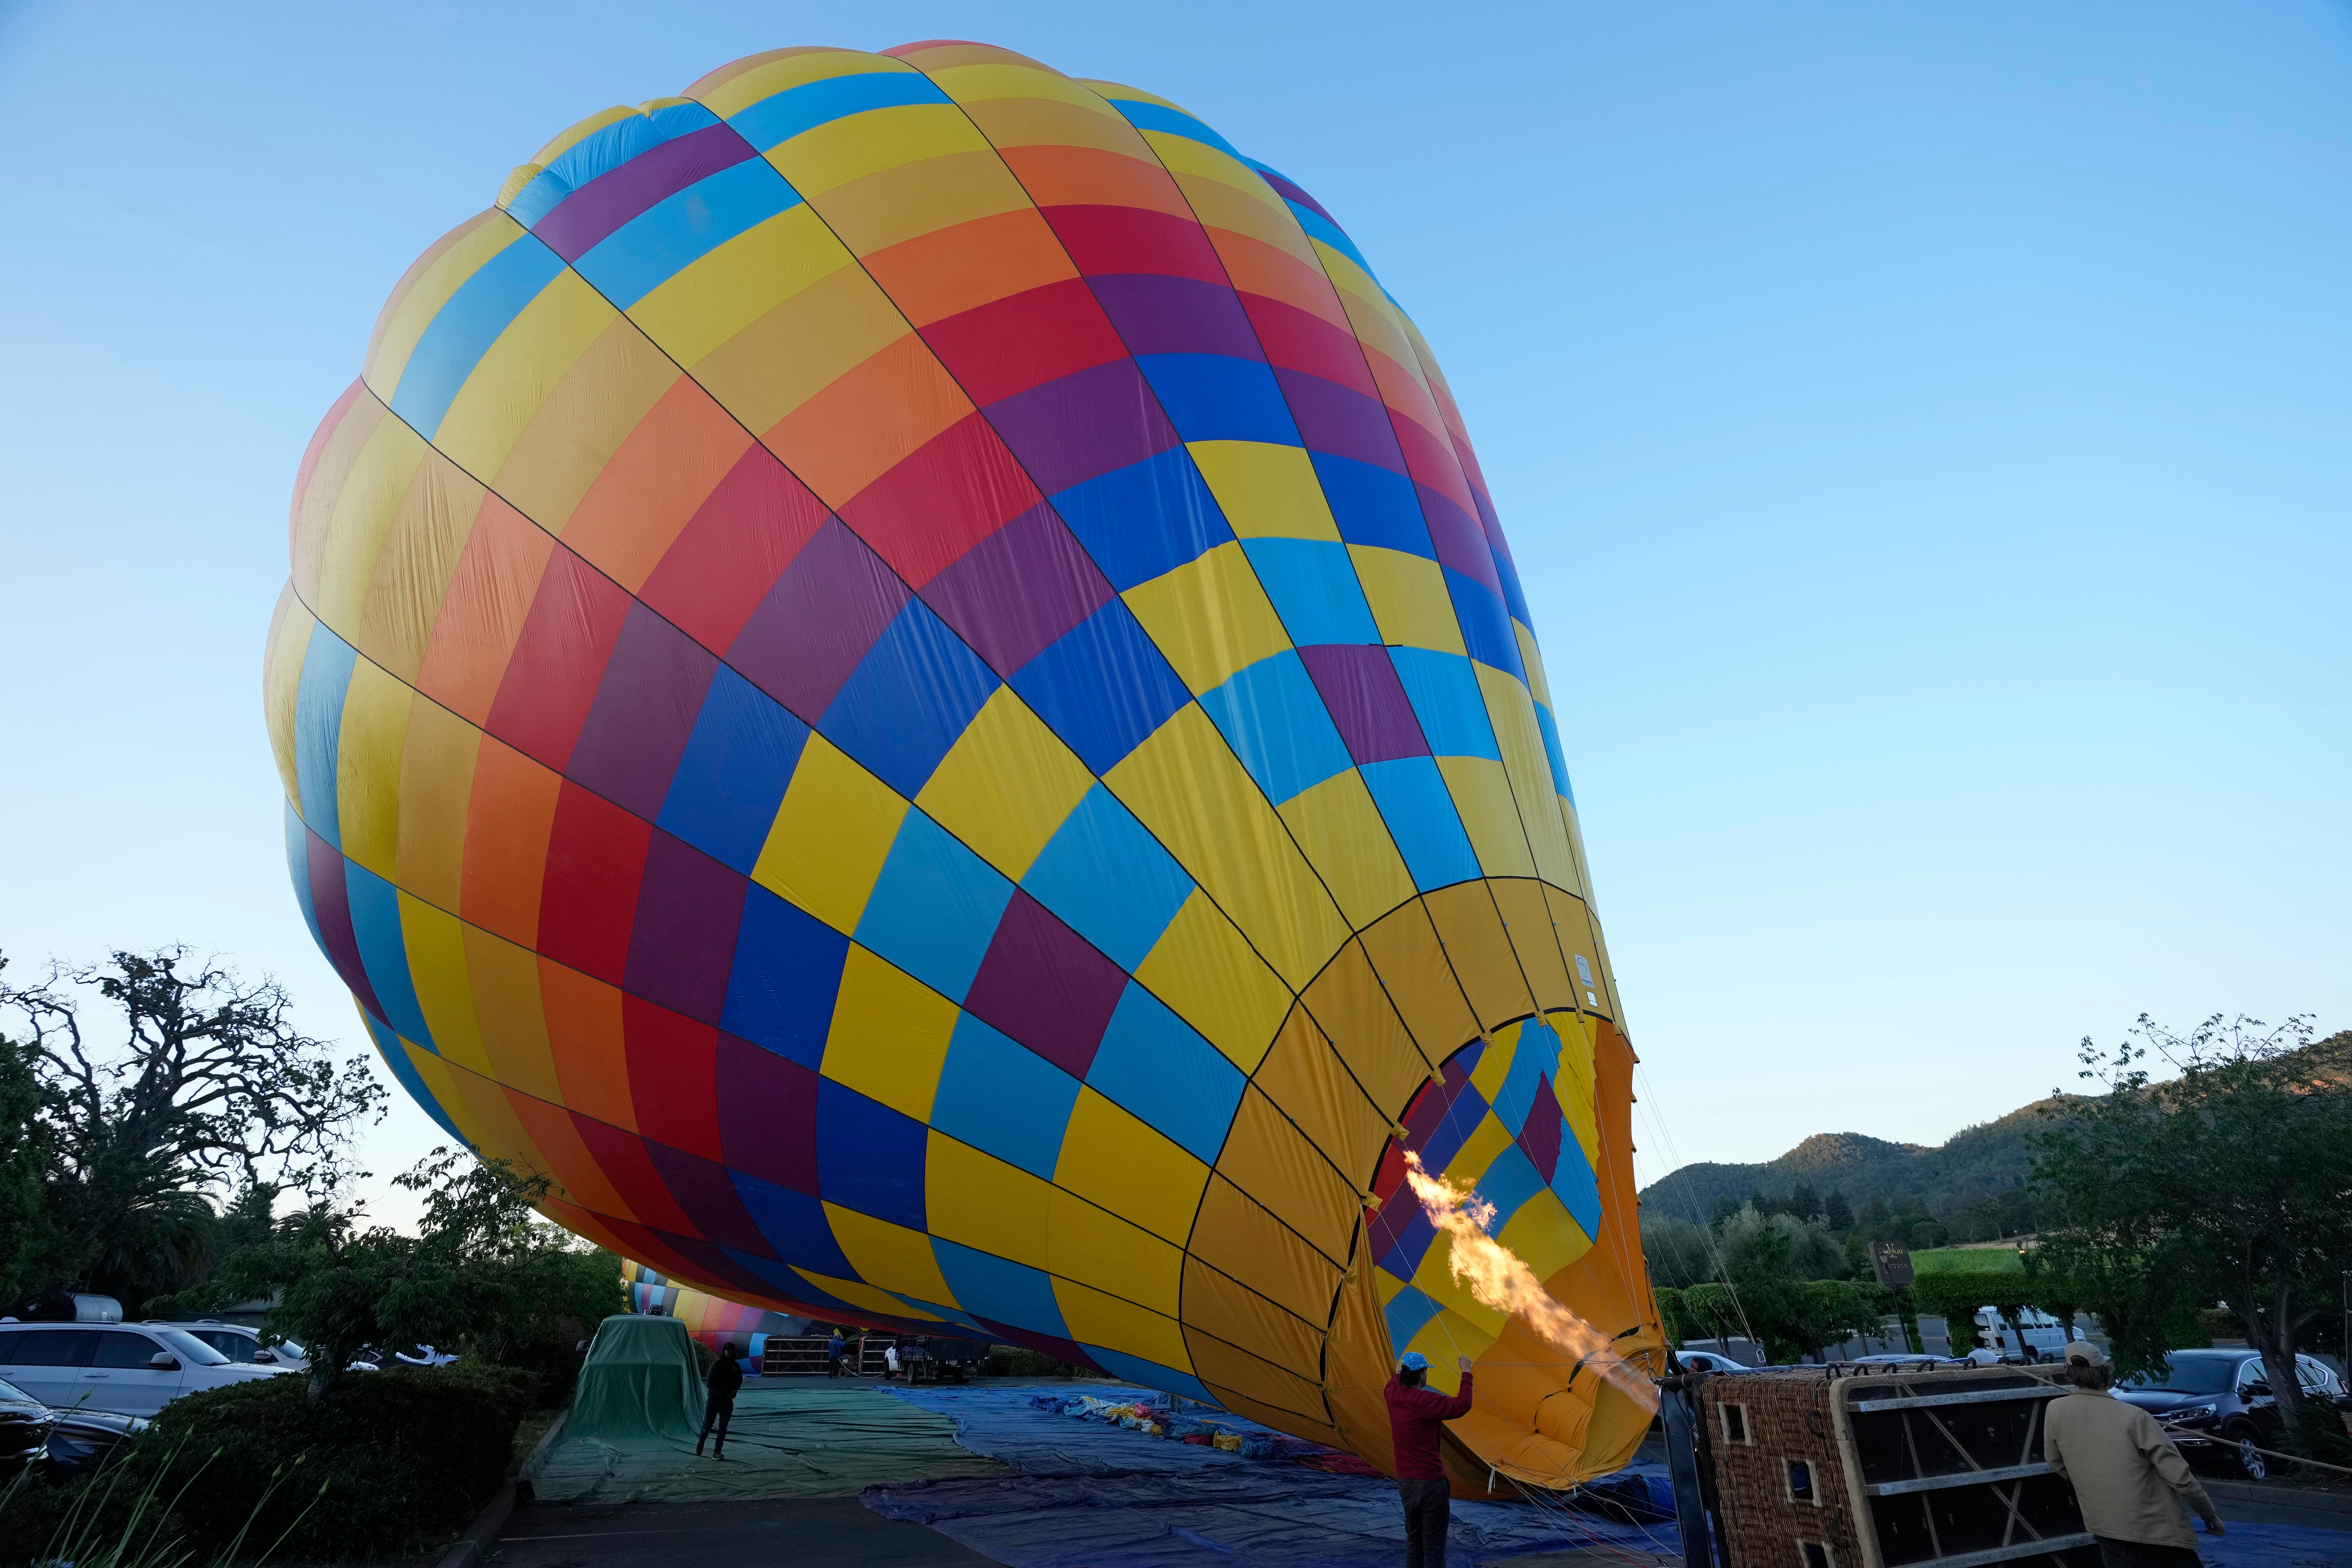 A man has died after a hot air balloon accident in Worcestershire (file image, AP)